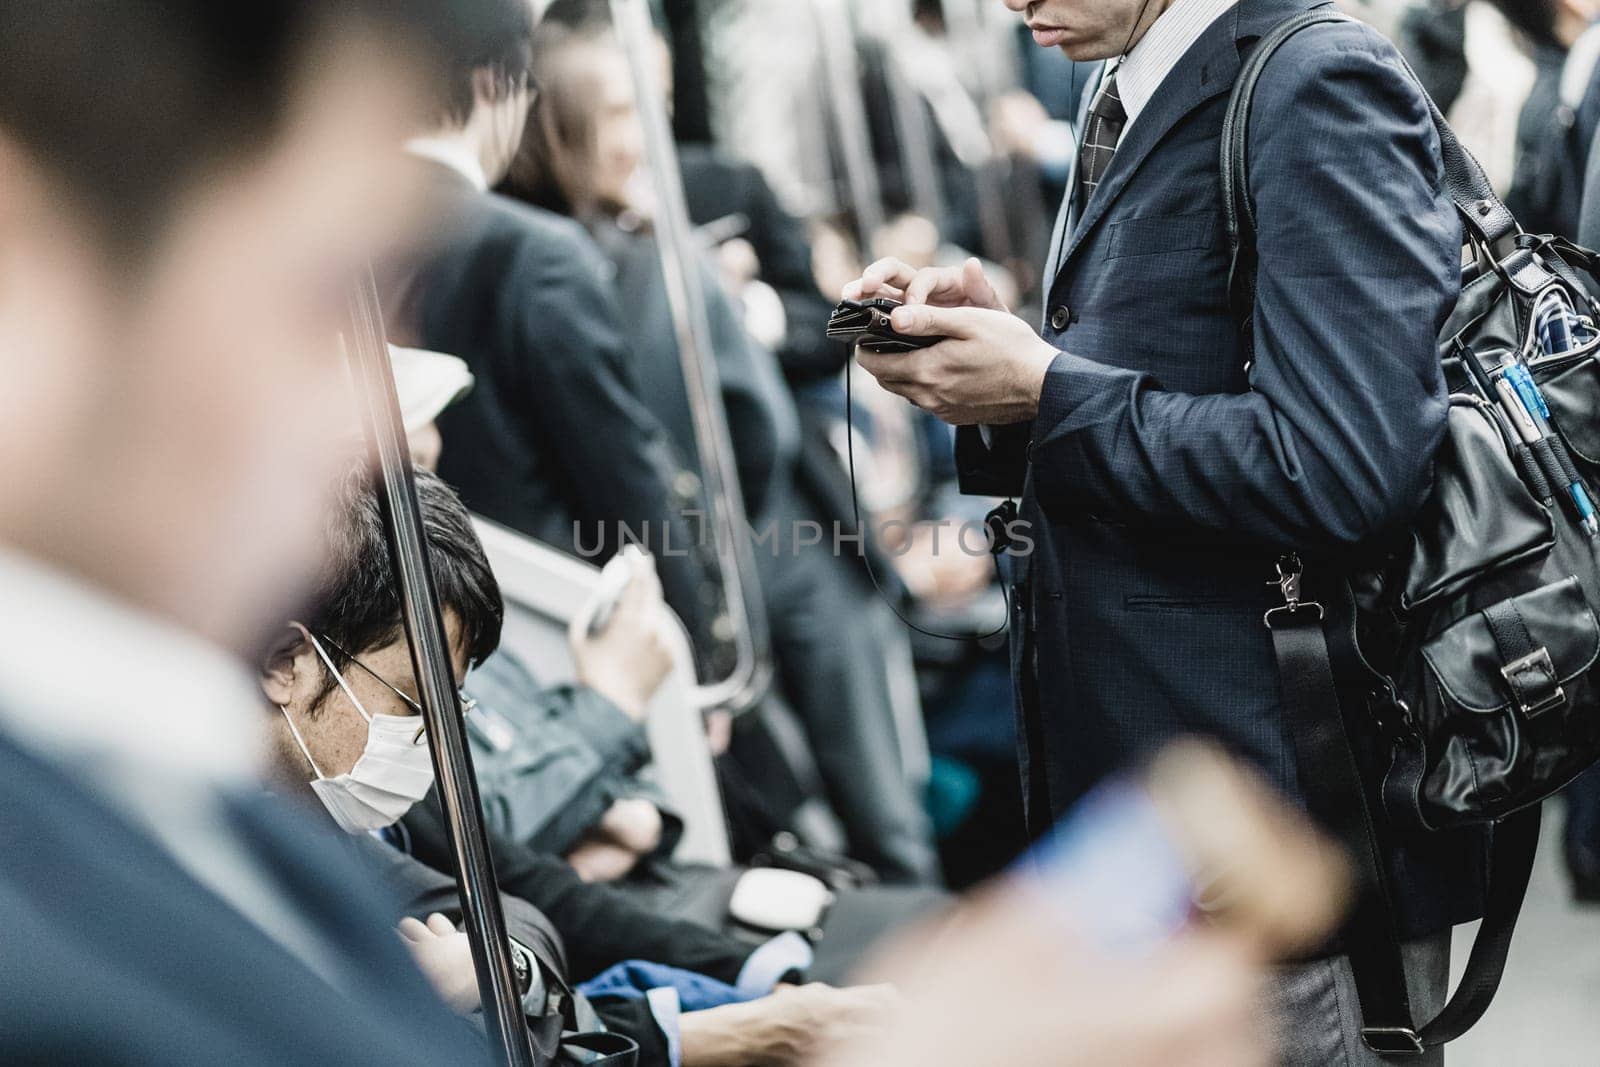 Interior of modern Tokyo metro with passengers on seats and businessmen using their cell phones. Corporate business people commuting to work by public transport. Horizontal composition.